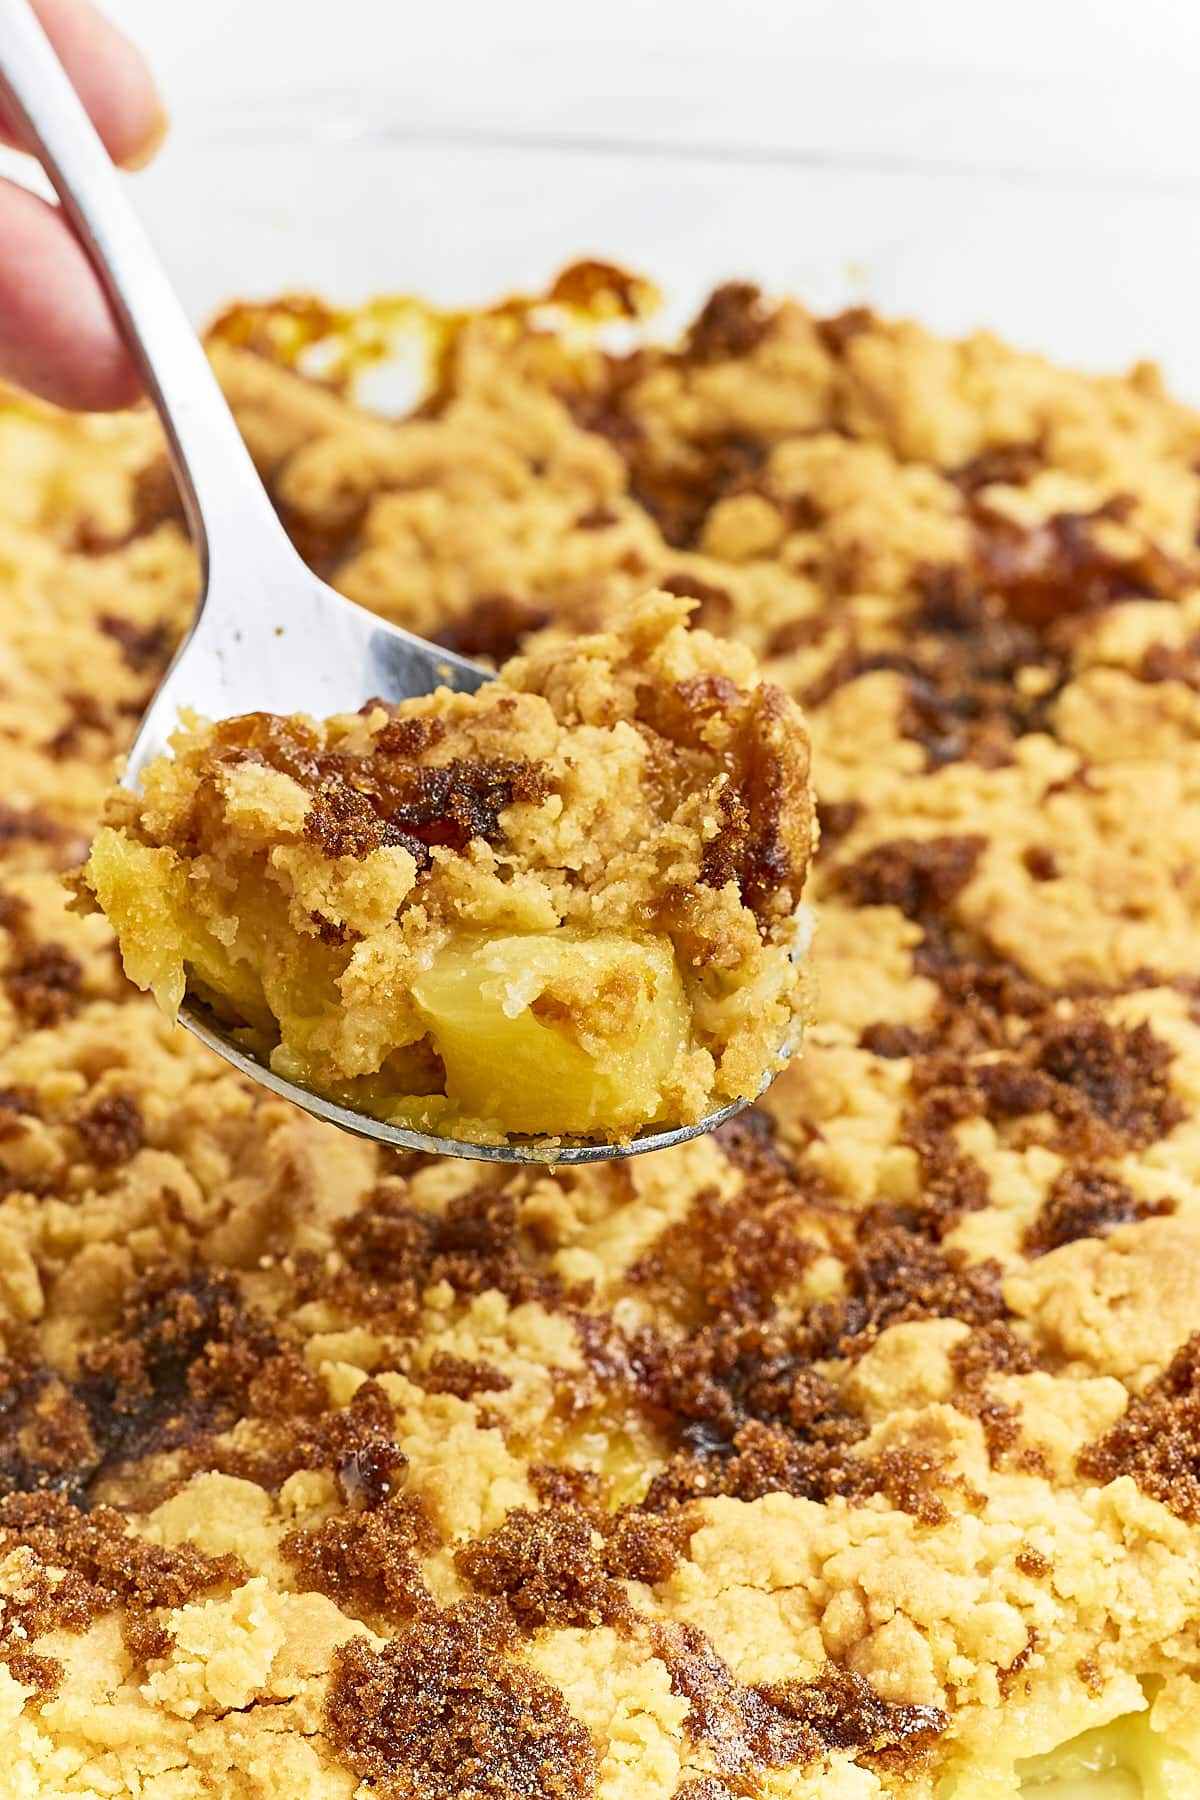 A spoonful of freshly baked Pineapple Dump Cake.